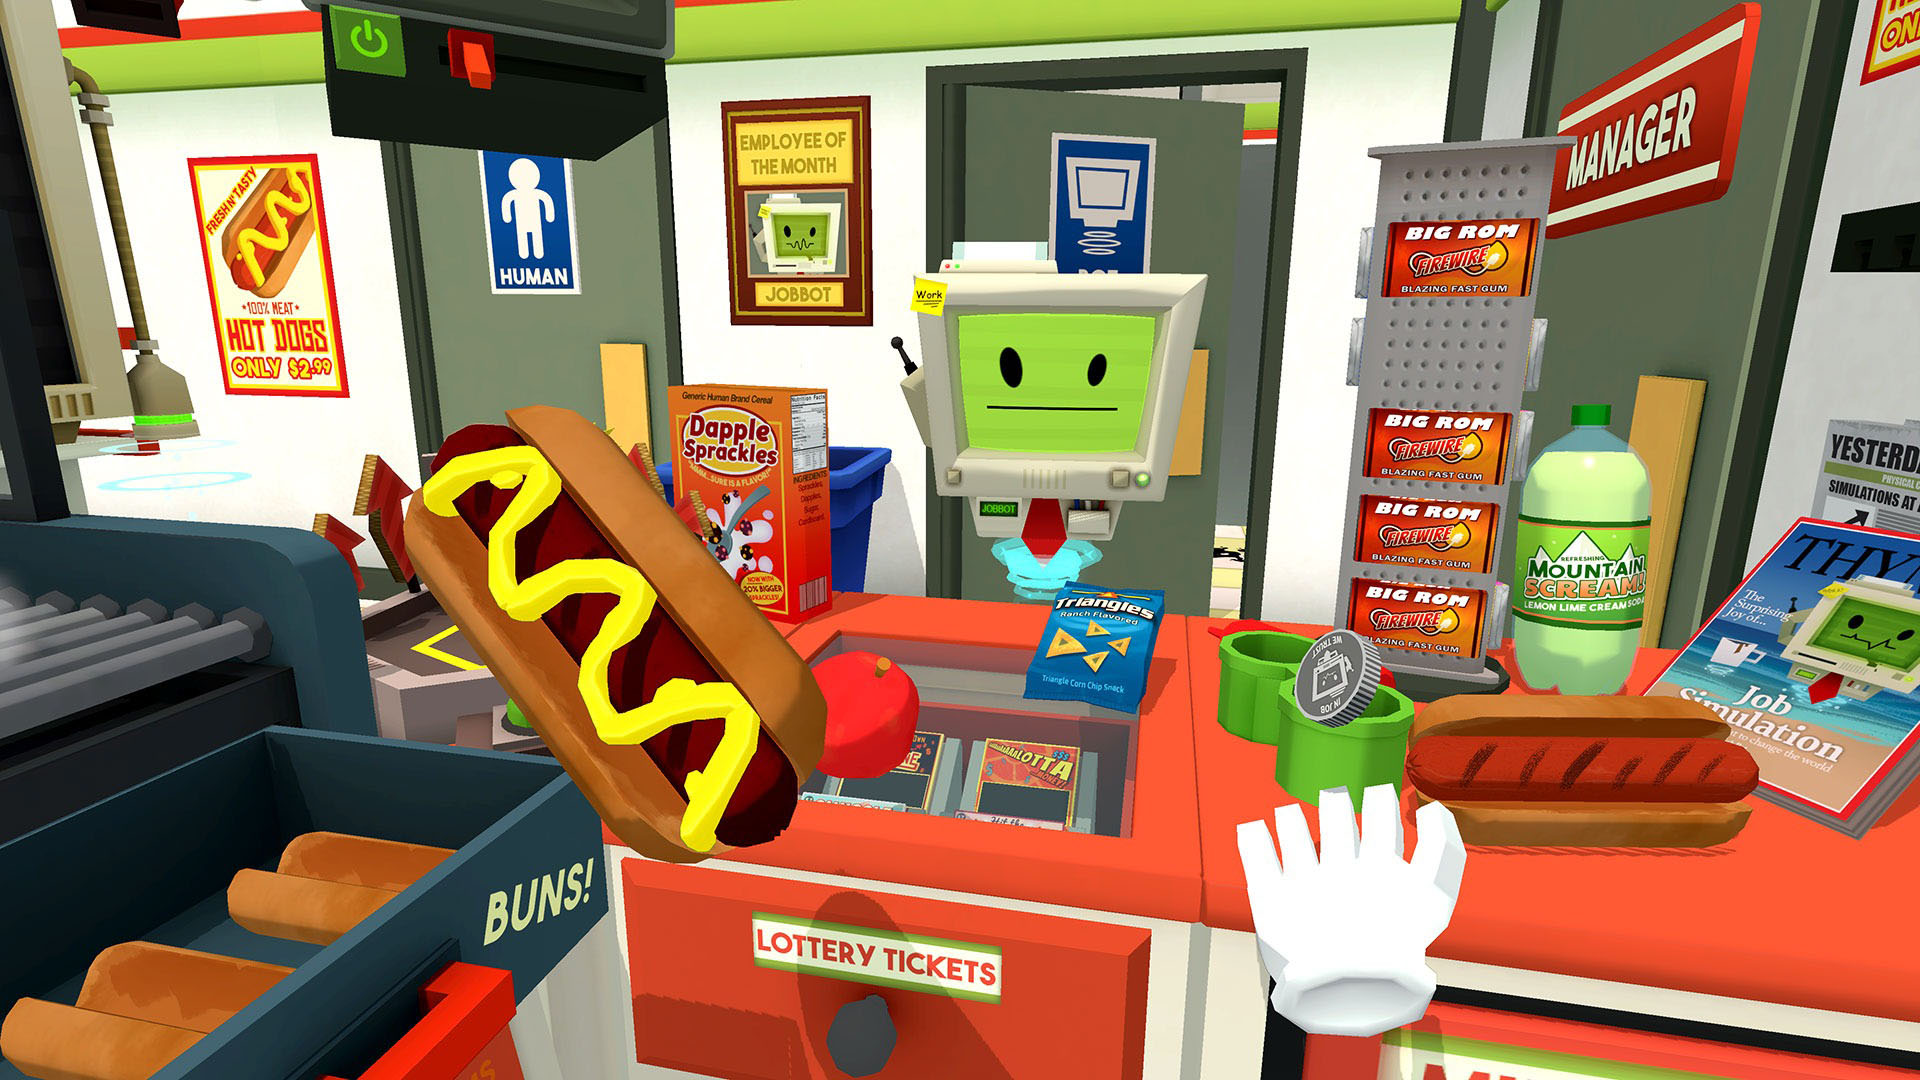 Job Simulator: The 2050 Archives is a virtual reality simulation video game developed and published by Owlchemy Labs for Microsoft Windows, PlayStatio...